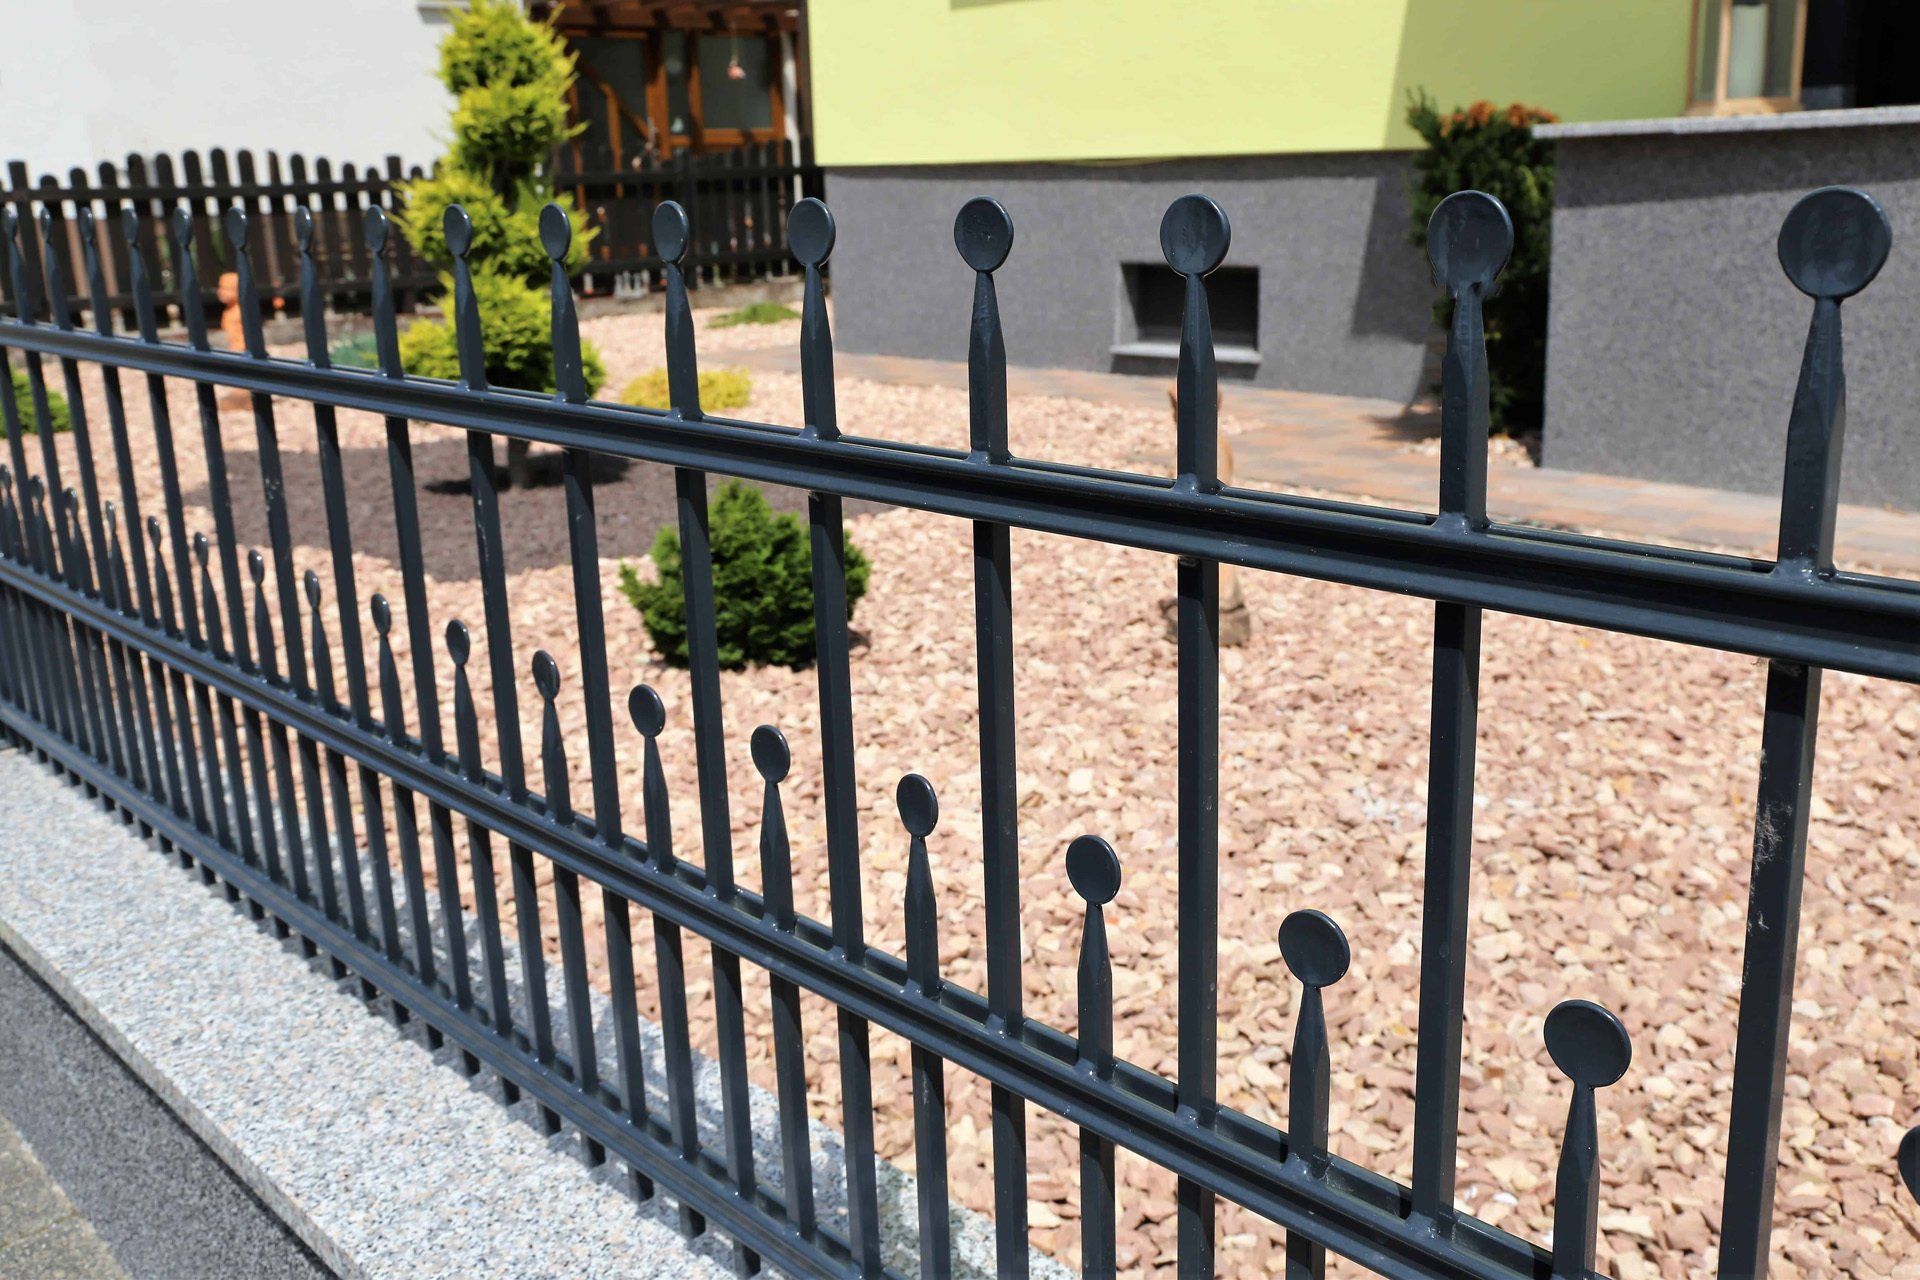 Wrought iron fencing is strong